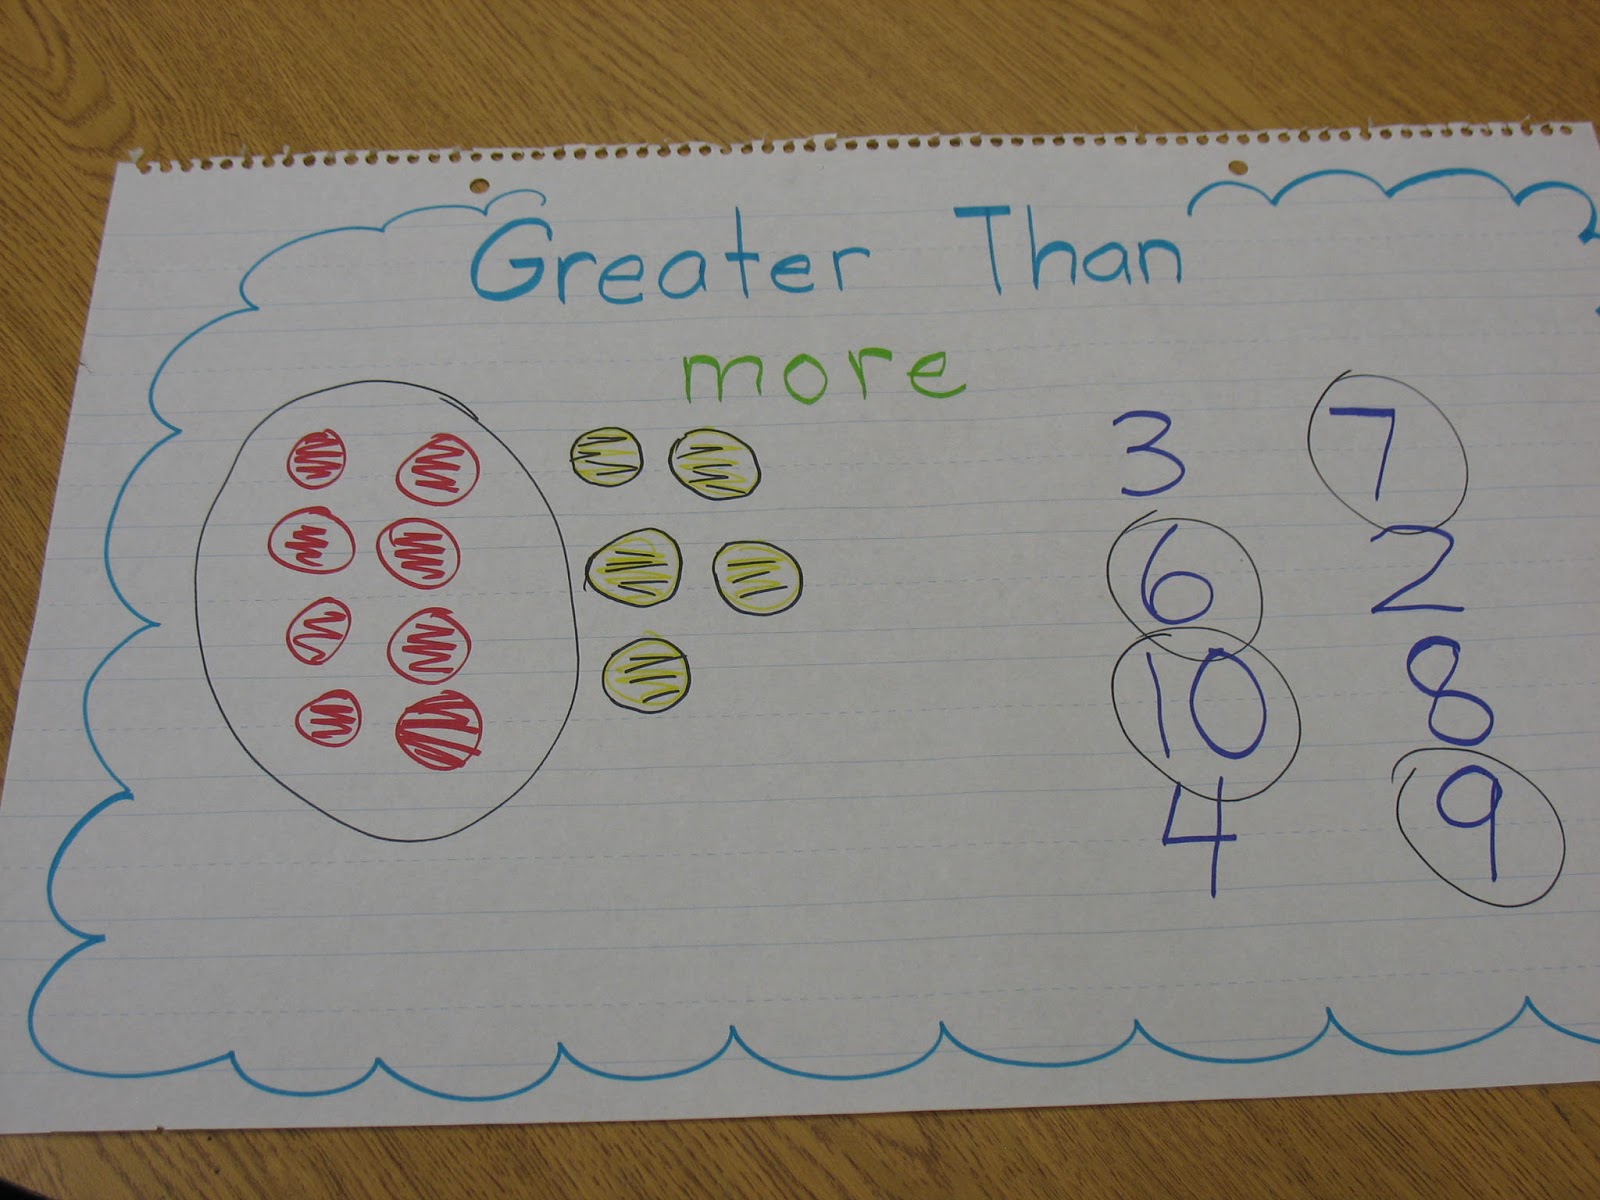 Comparing Numbers Anchor Chart